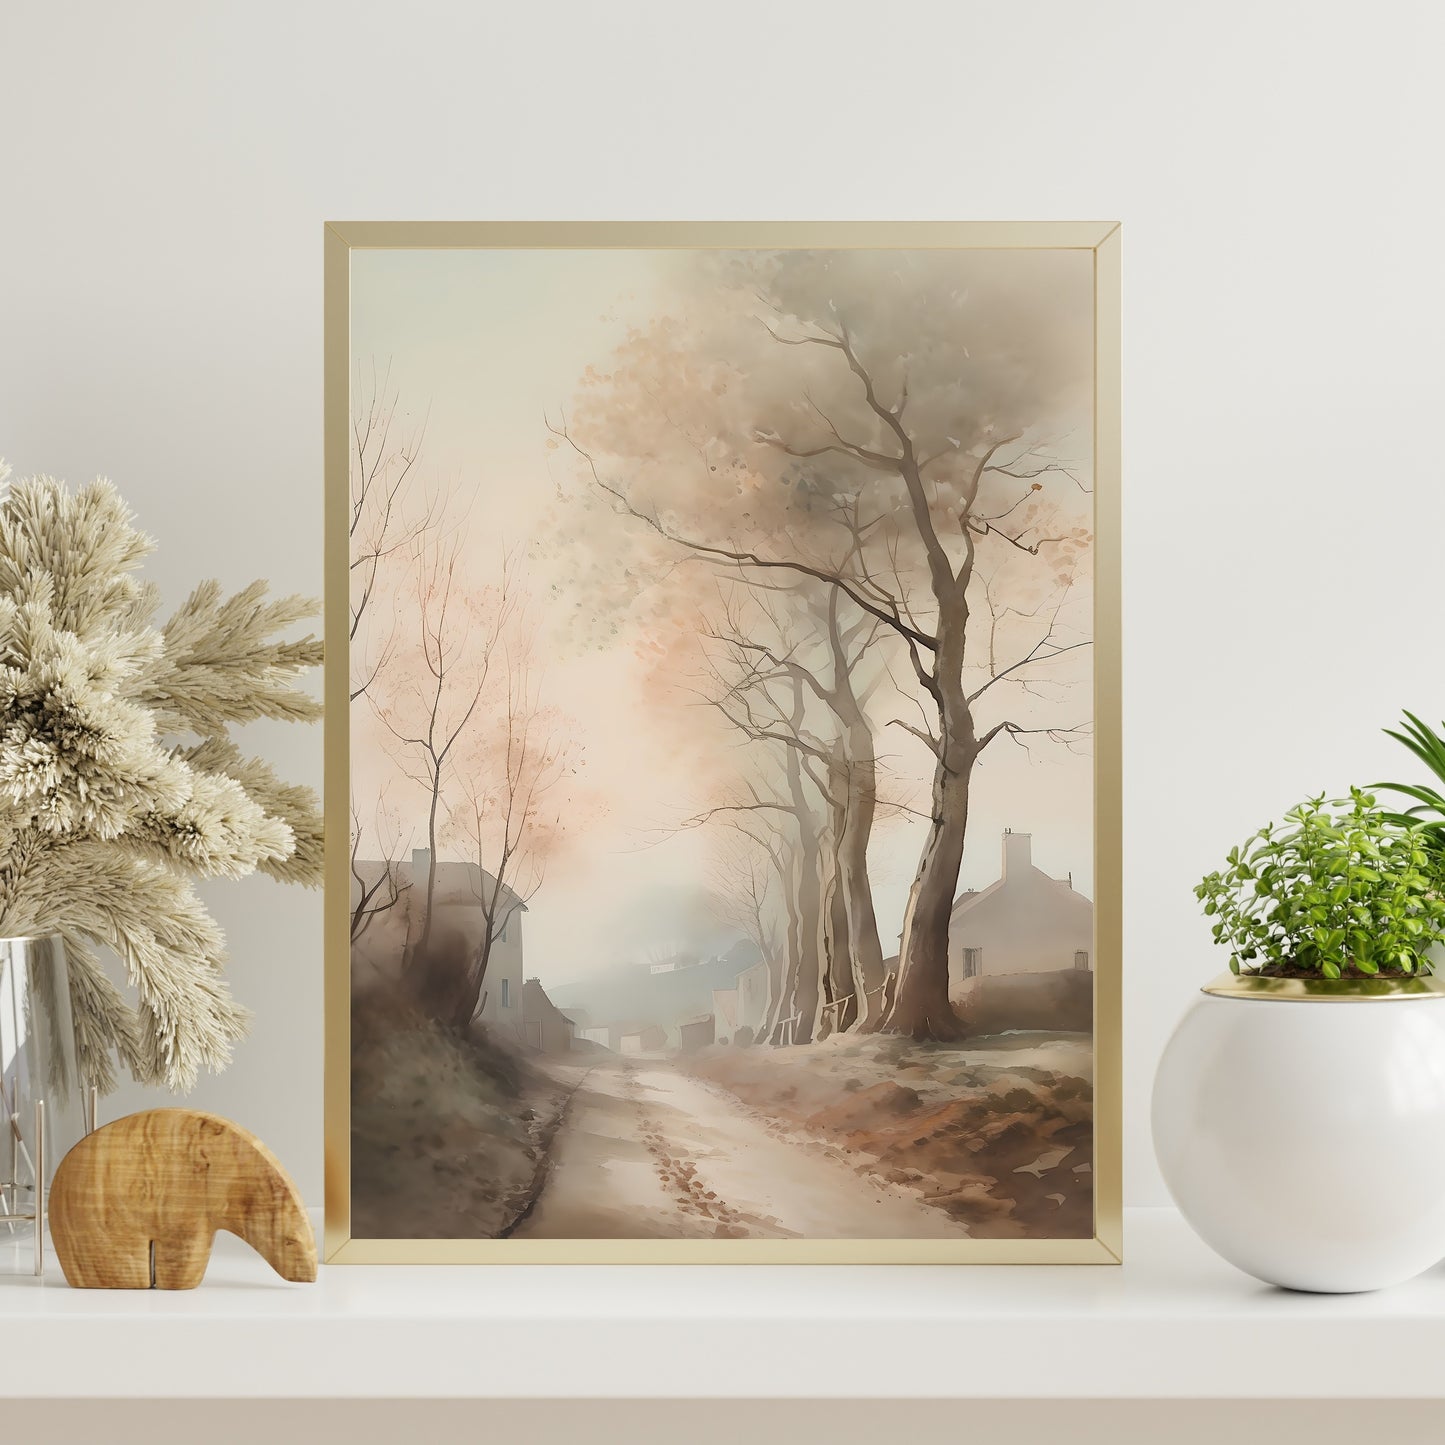 French Countryside Watercolor Painting Paper Poster Prints Autumn Alley to Quaint Village with High Trees, Neutral Soft Colors, Rustic Home Decor Art muted